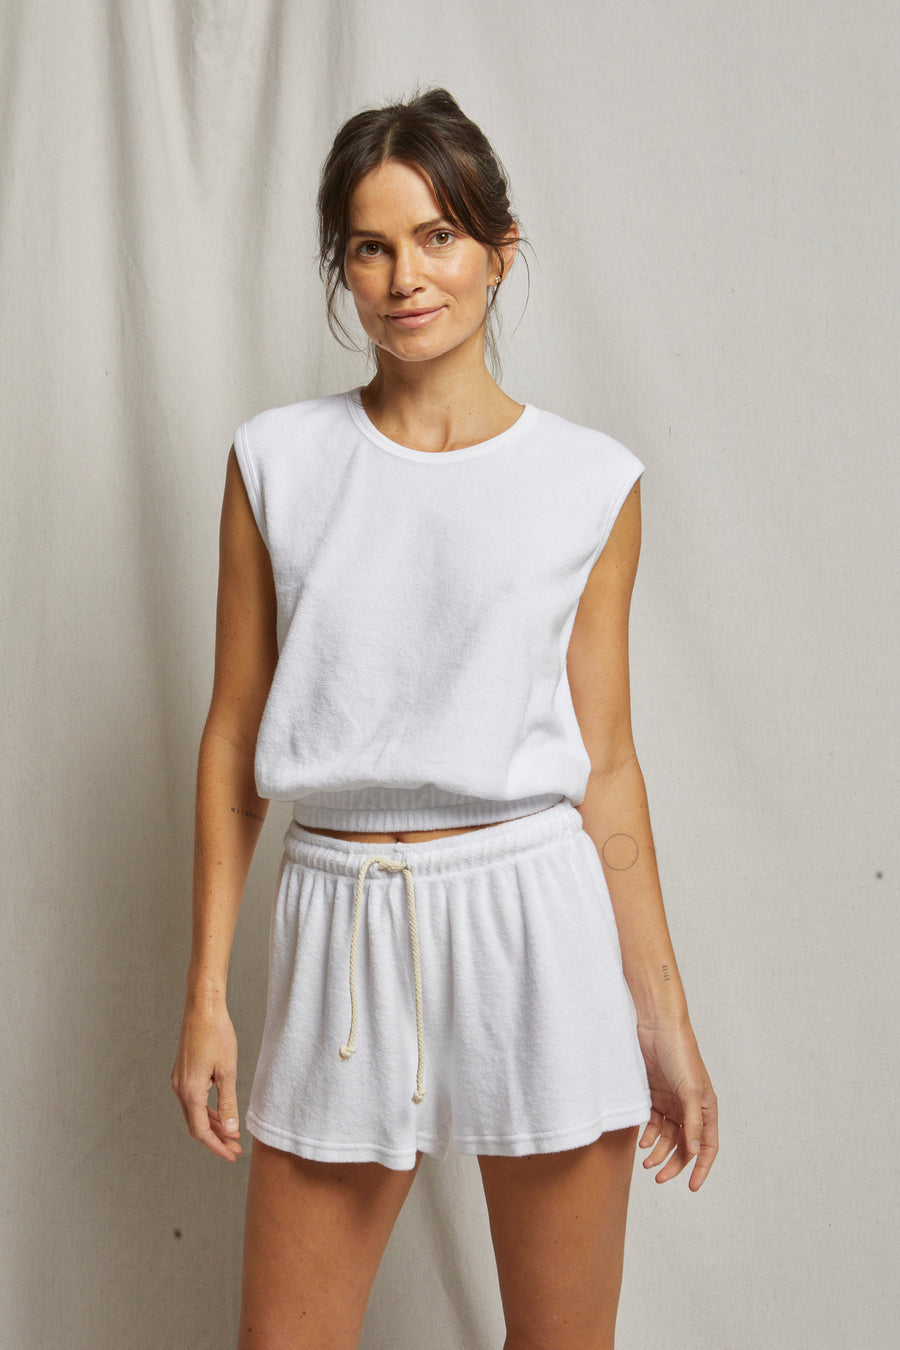 Perfect White Tee Loop Banded Terry Tank